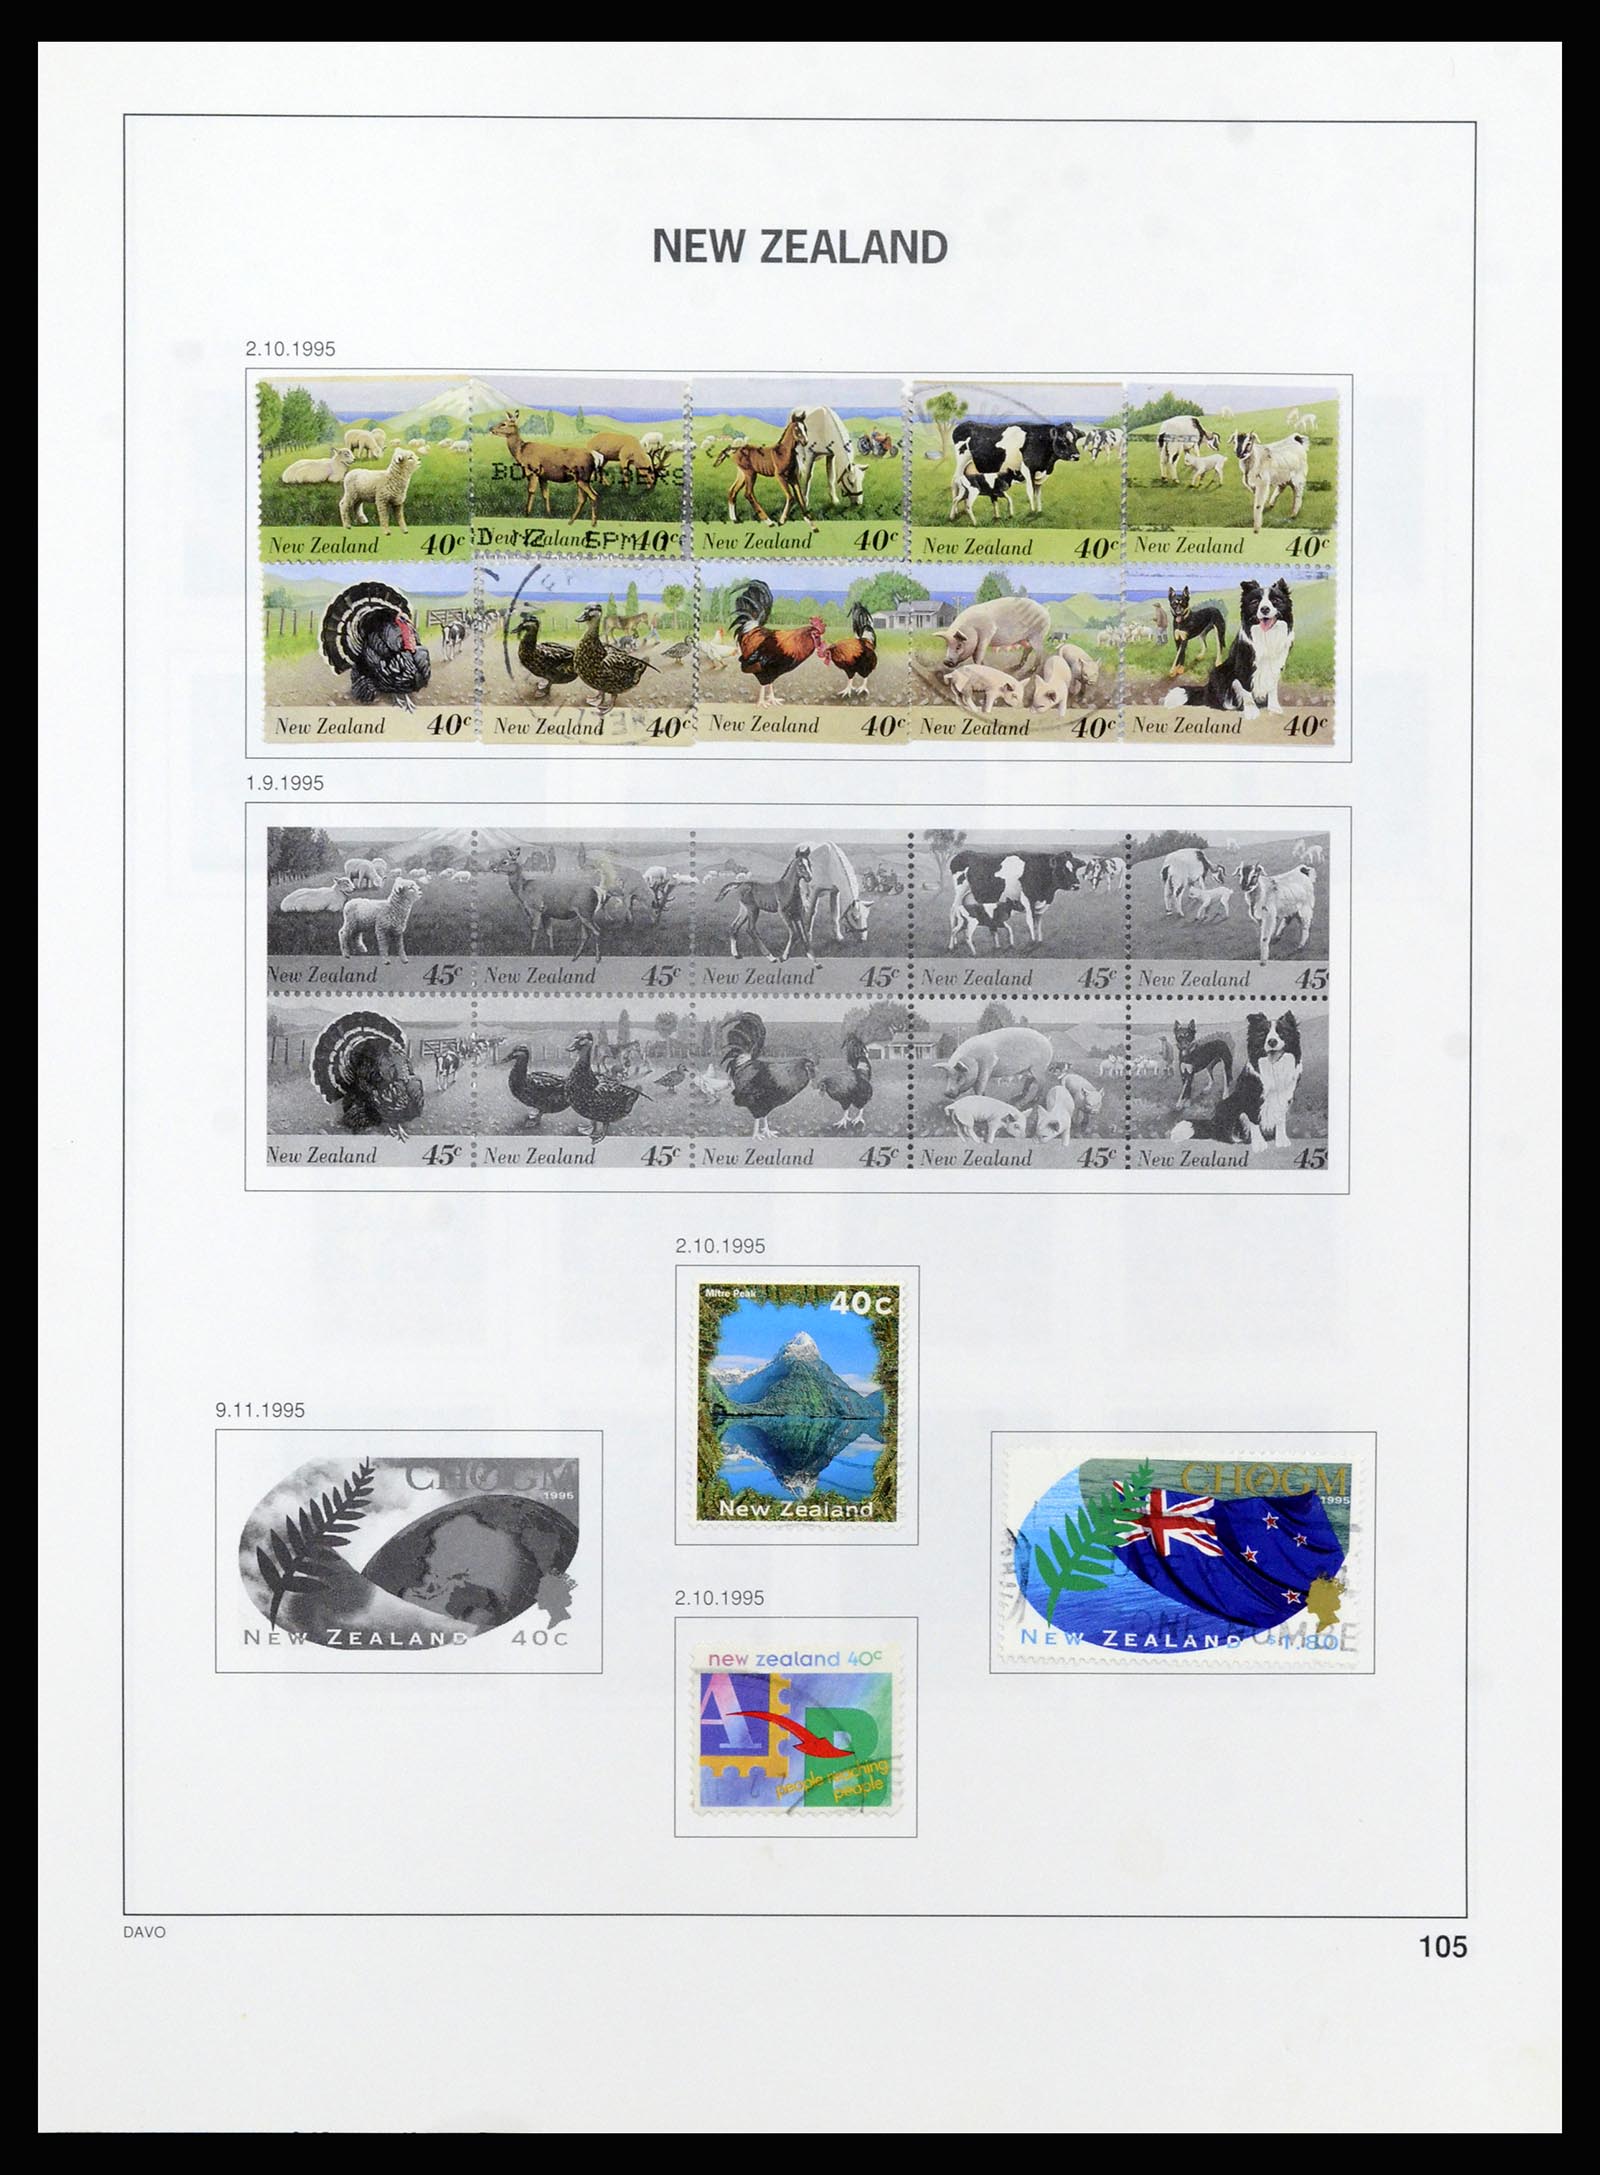 37209 104 - Stamp collection 37209 New Zealand 1855-1997.